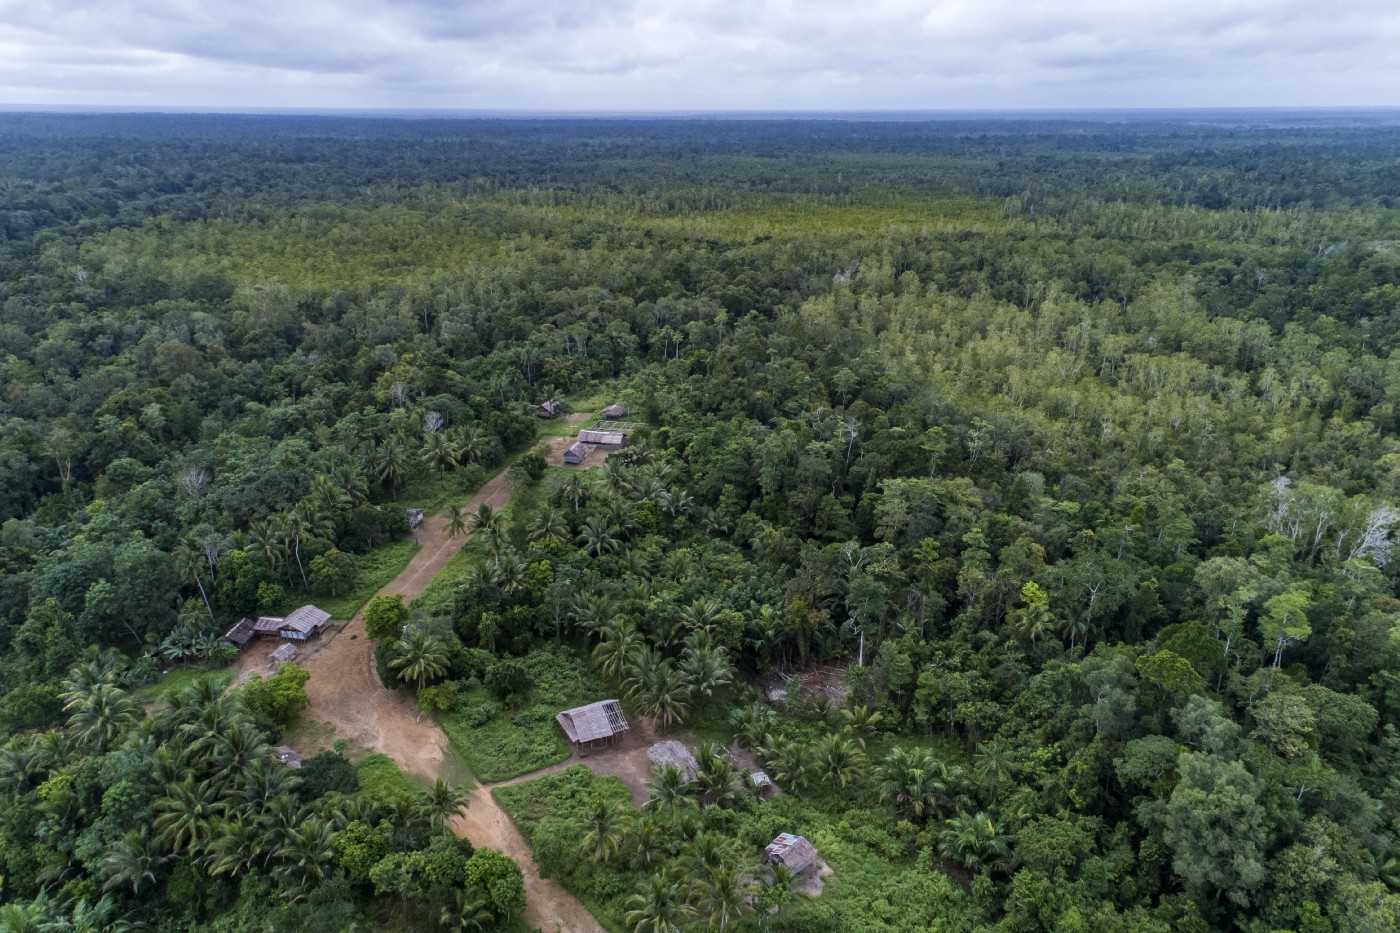 An Auyu village under the shadow of the Tanah Merah project. Villagers complained that basic information about the project was withheld from them. By Nanang Sujana for The Gecko Project and Mongabay.